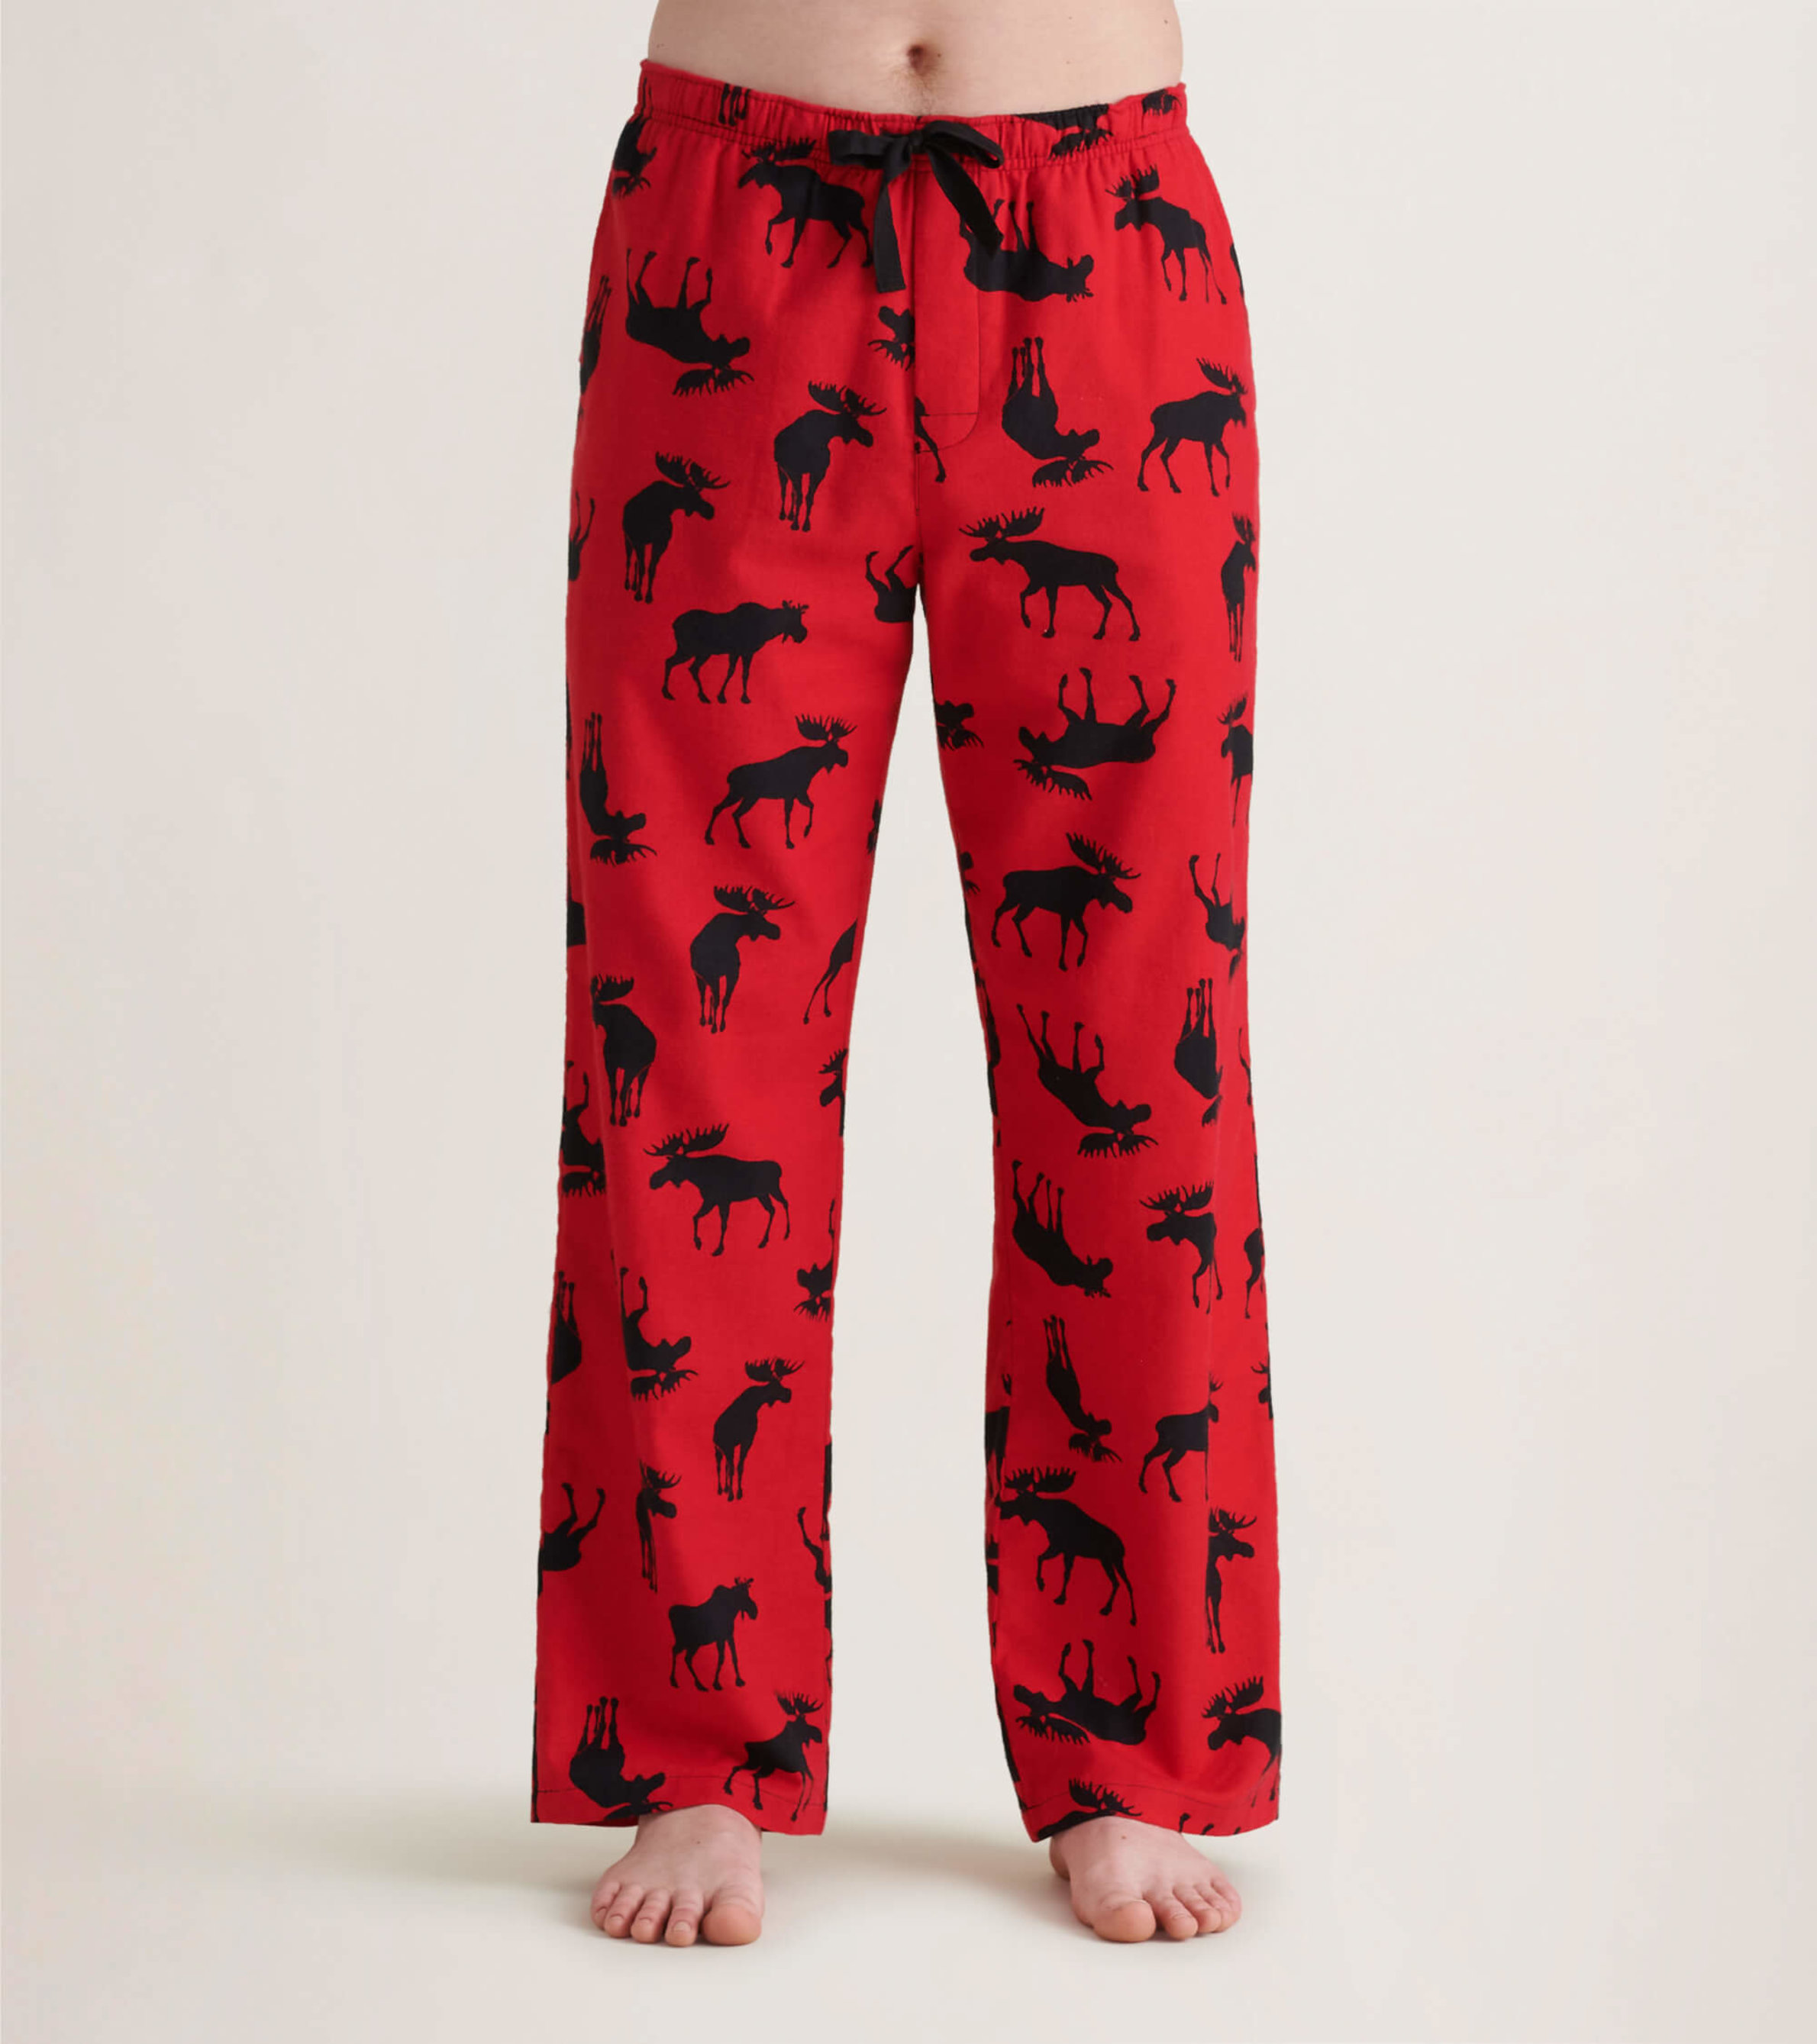 Flannel Women's Pajama Pants in Red and Black